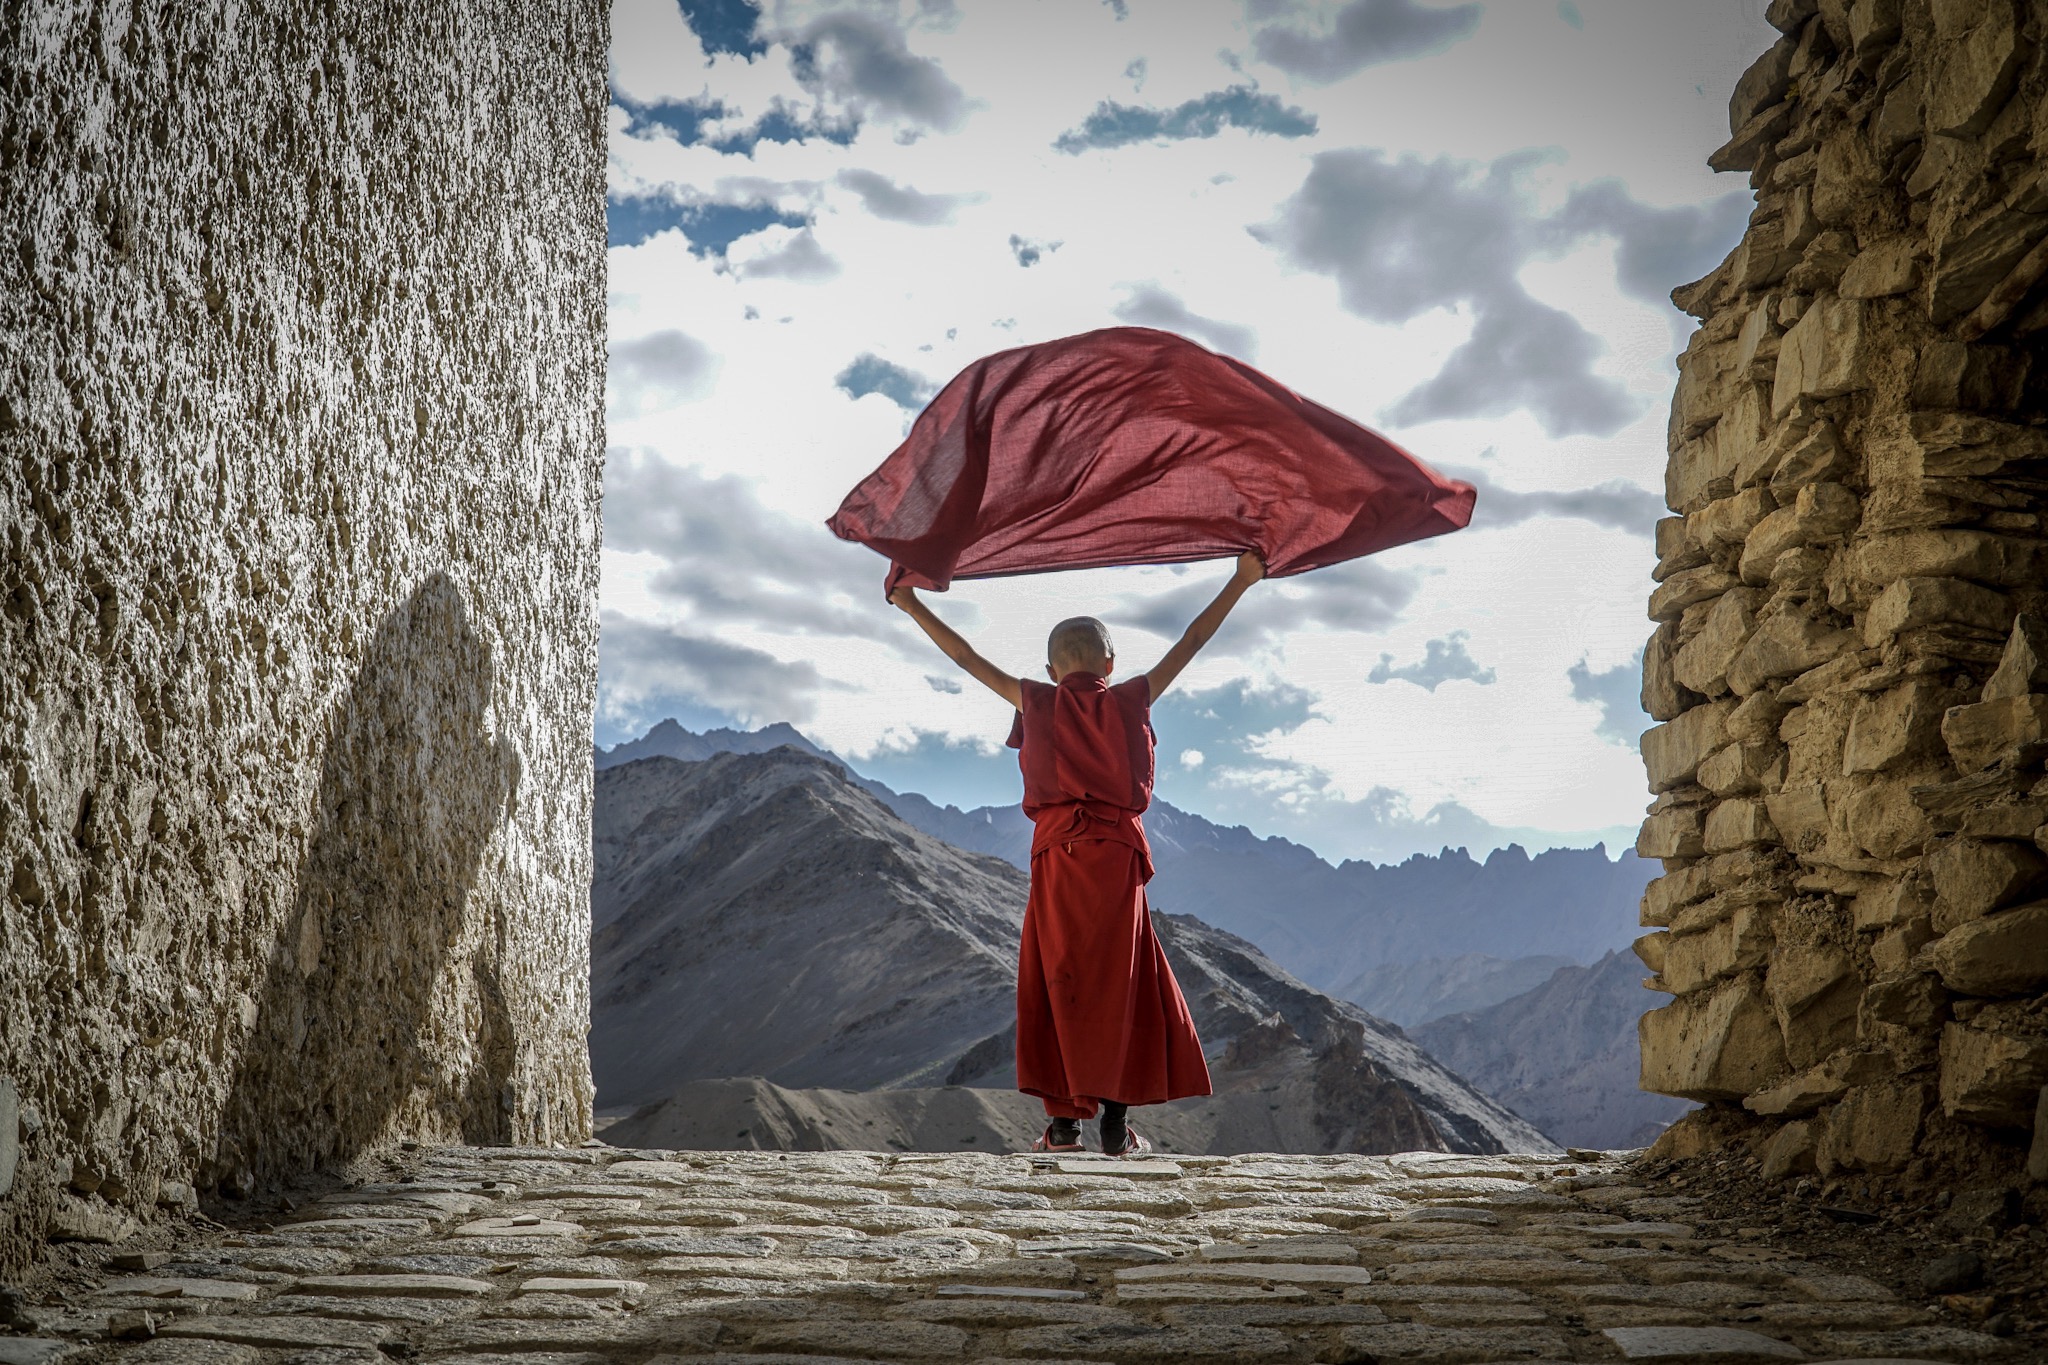 Like an Eagle soaring in these Himalayan mountains, the novice monk is on top of the world.